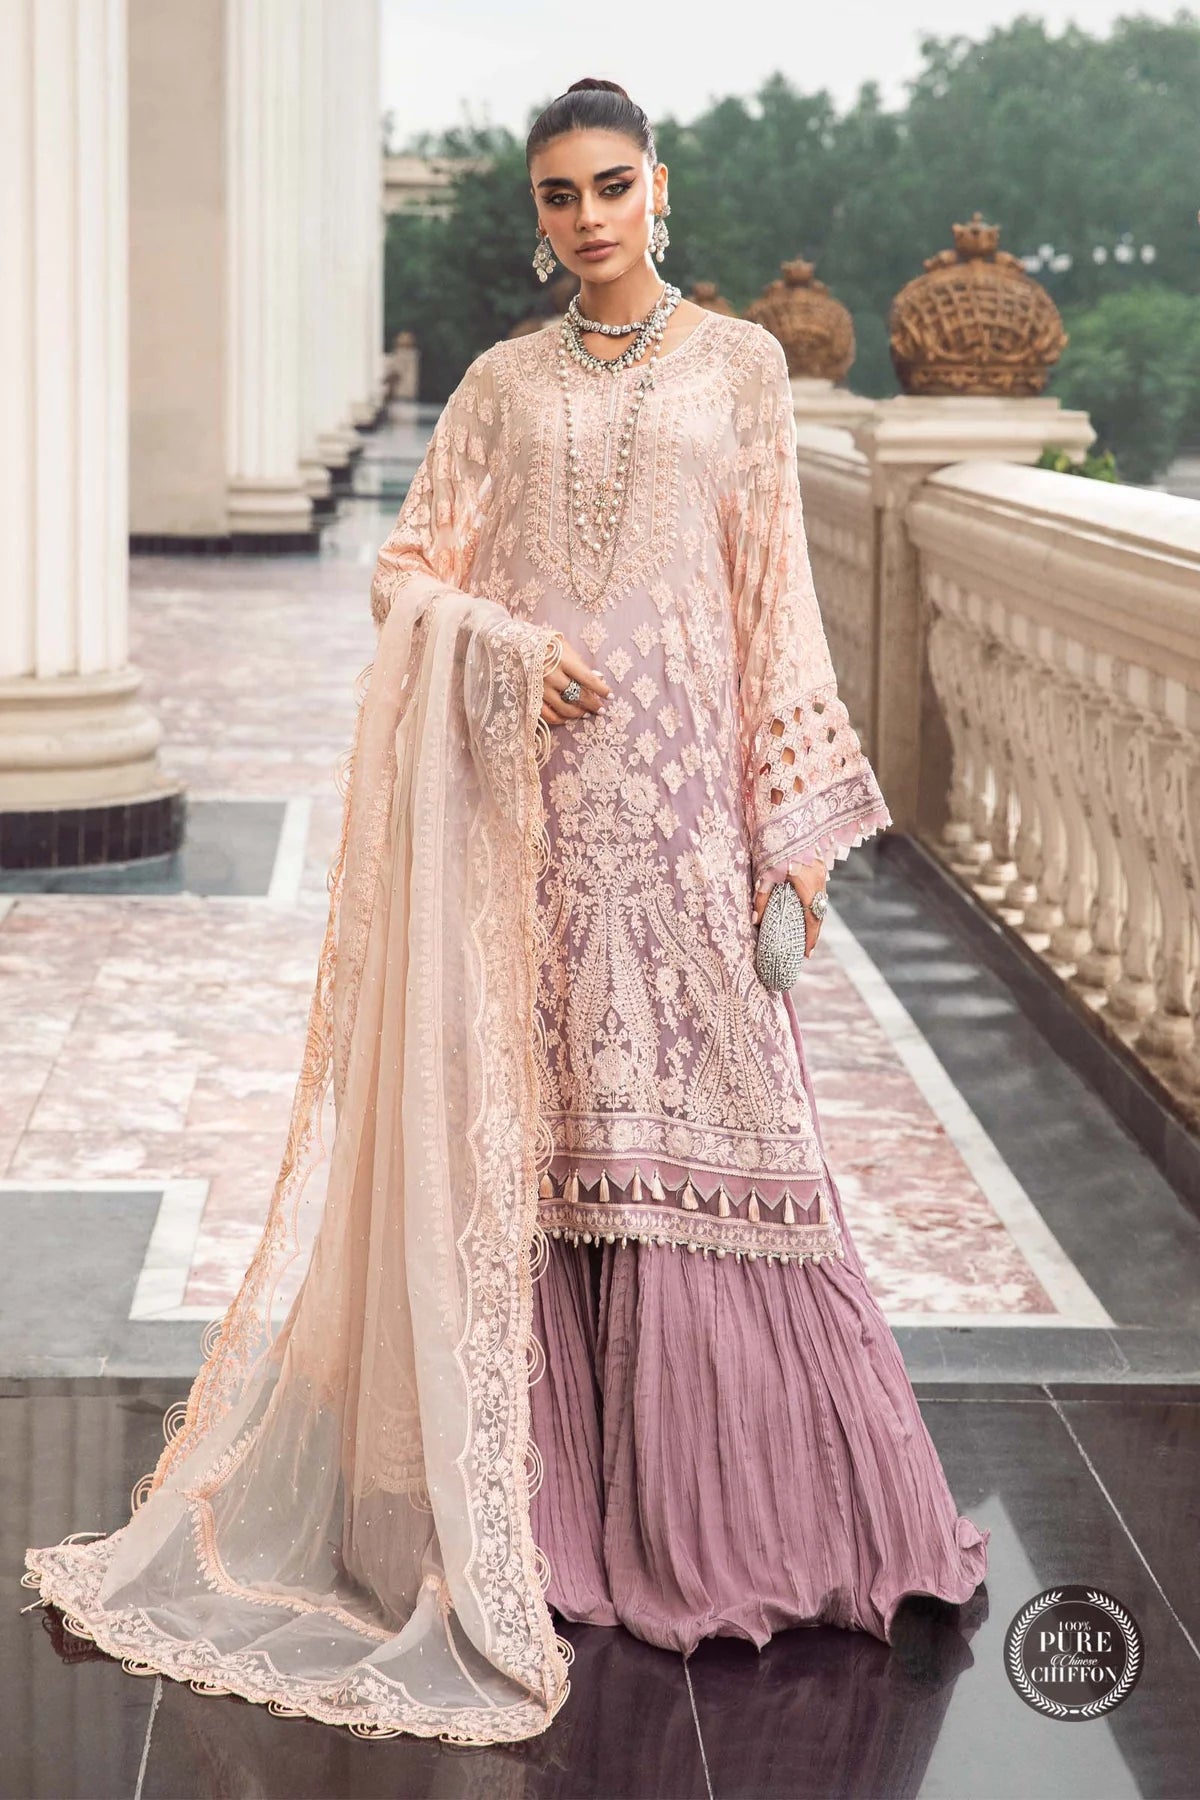 Maria B Inspired Mbroidered Gharara 3 Piece Wedding Outfit - Desi Posh